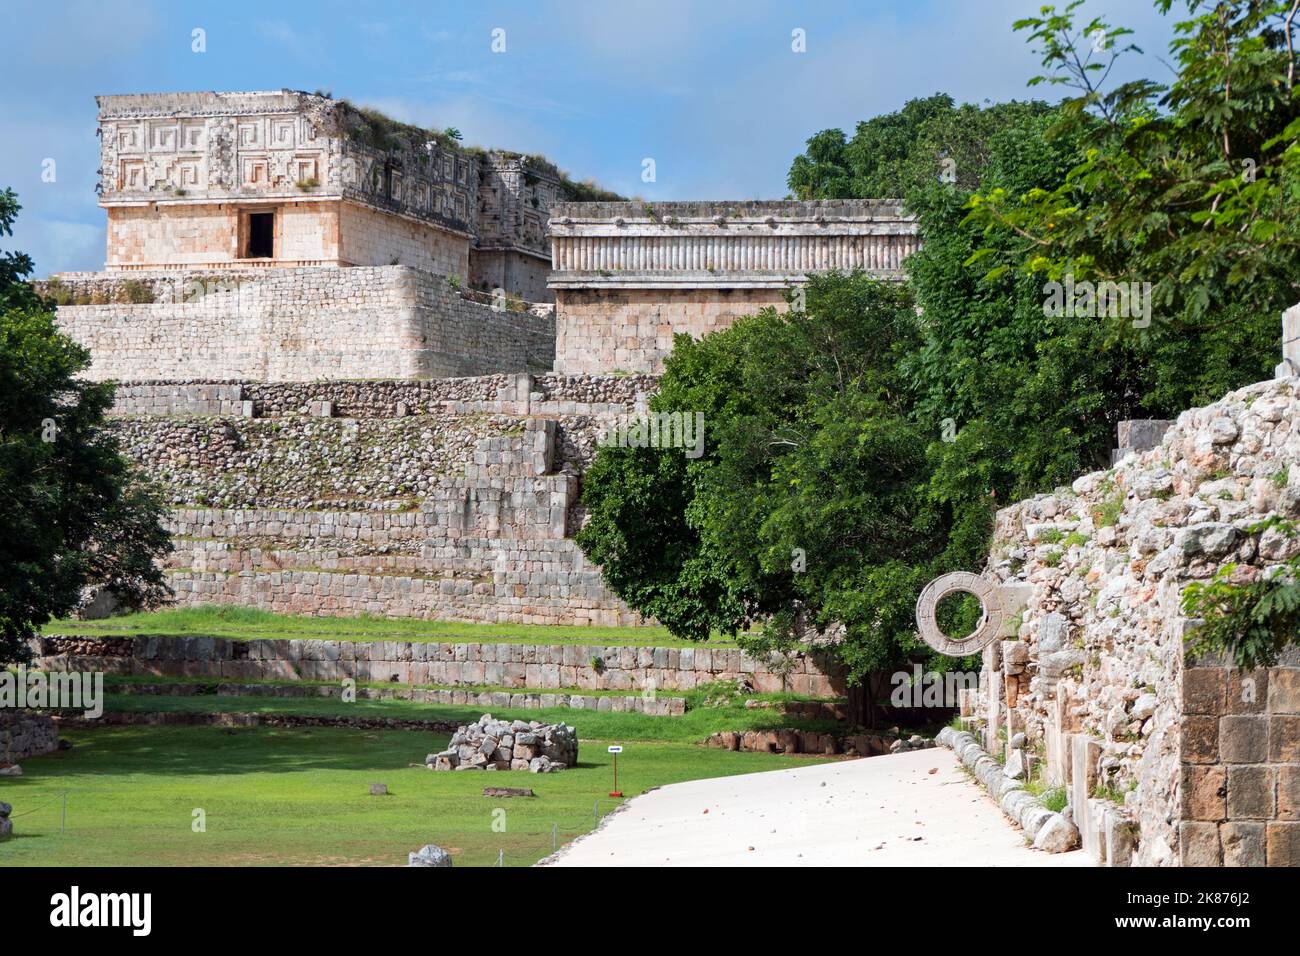 The Maya archeological site of Uxmal in Yucatan, Mexico. Mayan ruins with the Ballcourt and the Governor's Palace as attractions for tourism and trave Stock Photo